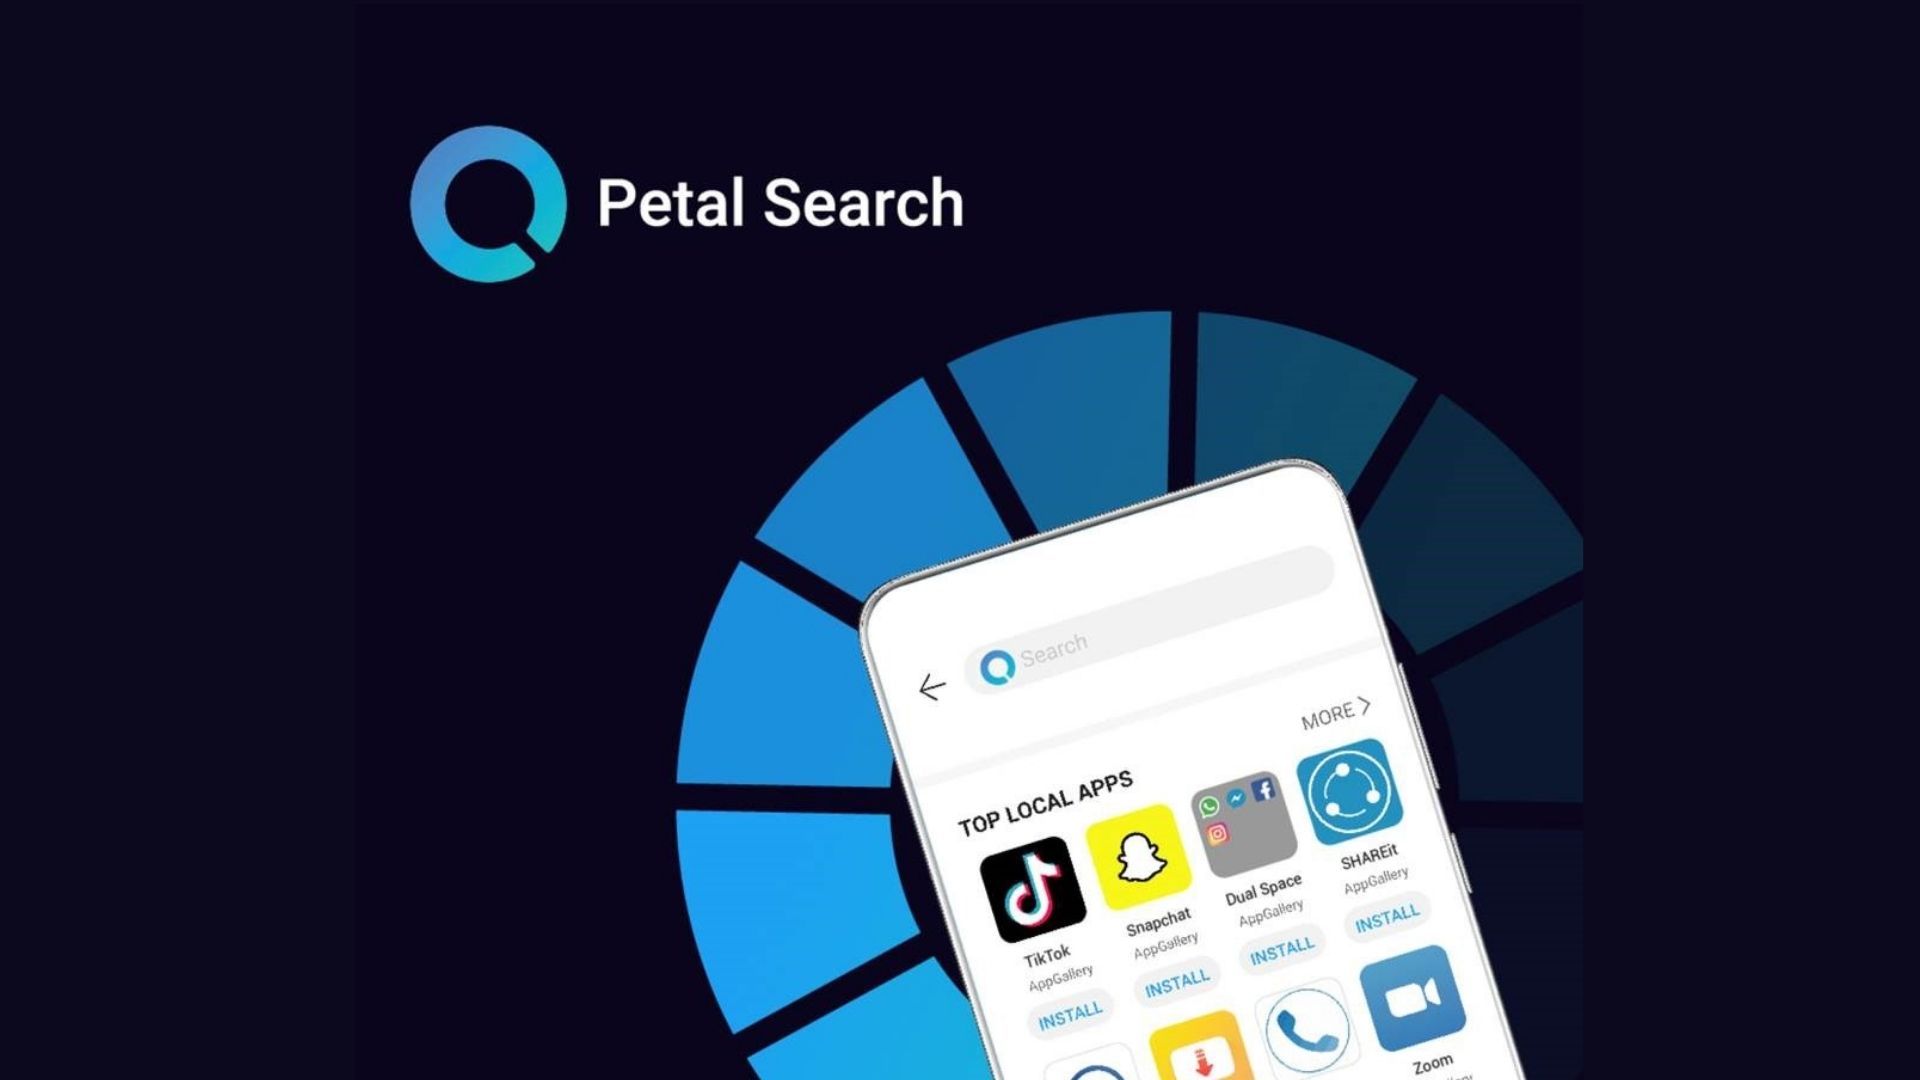 Huawei announces updates to Petal Search bringing more apps, games and experiences